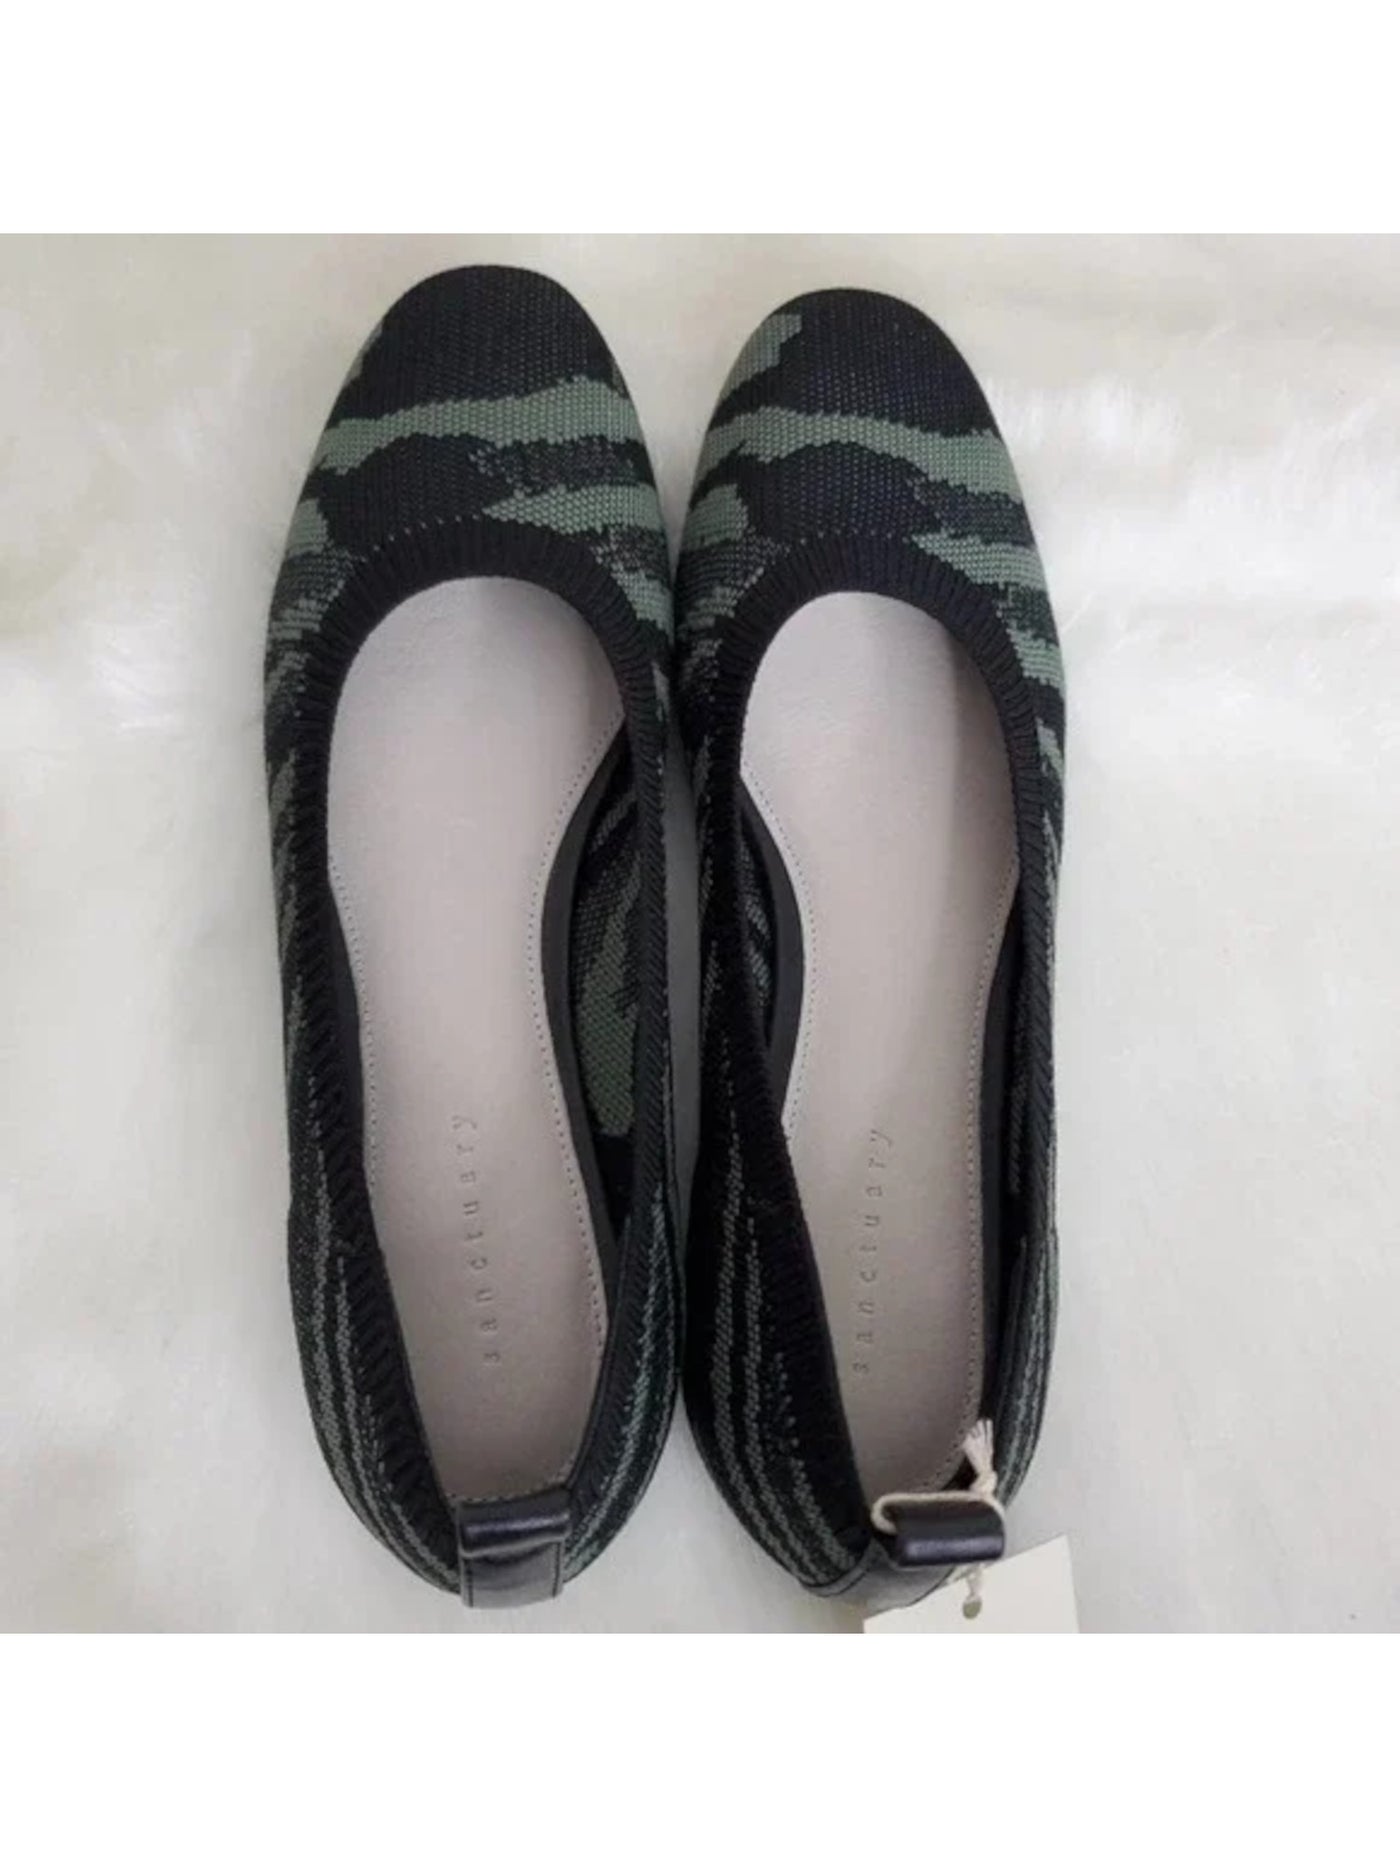 SANCTUARY Womens Green Camouflage Cushioned Stretch Social Round Toe Slip On Leather Ballet Flats 9 M